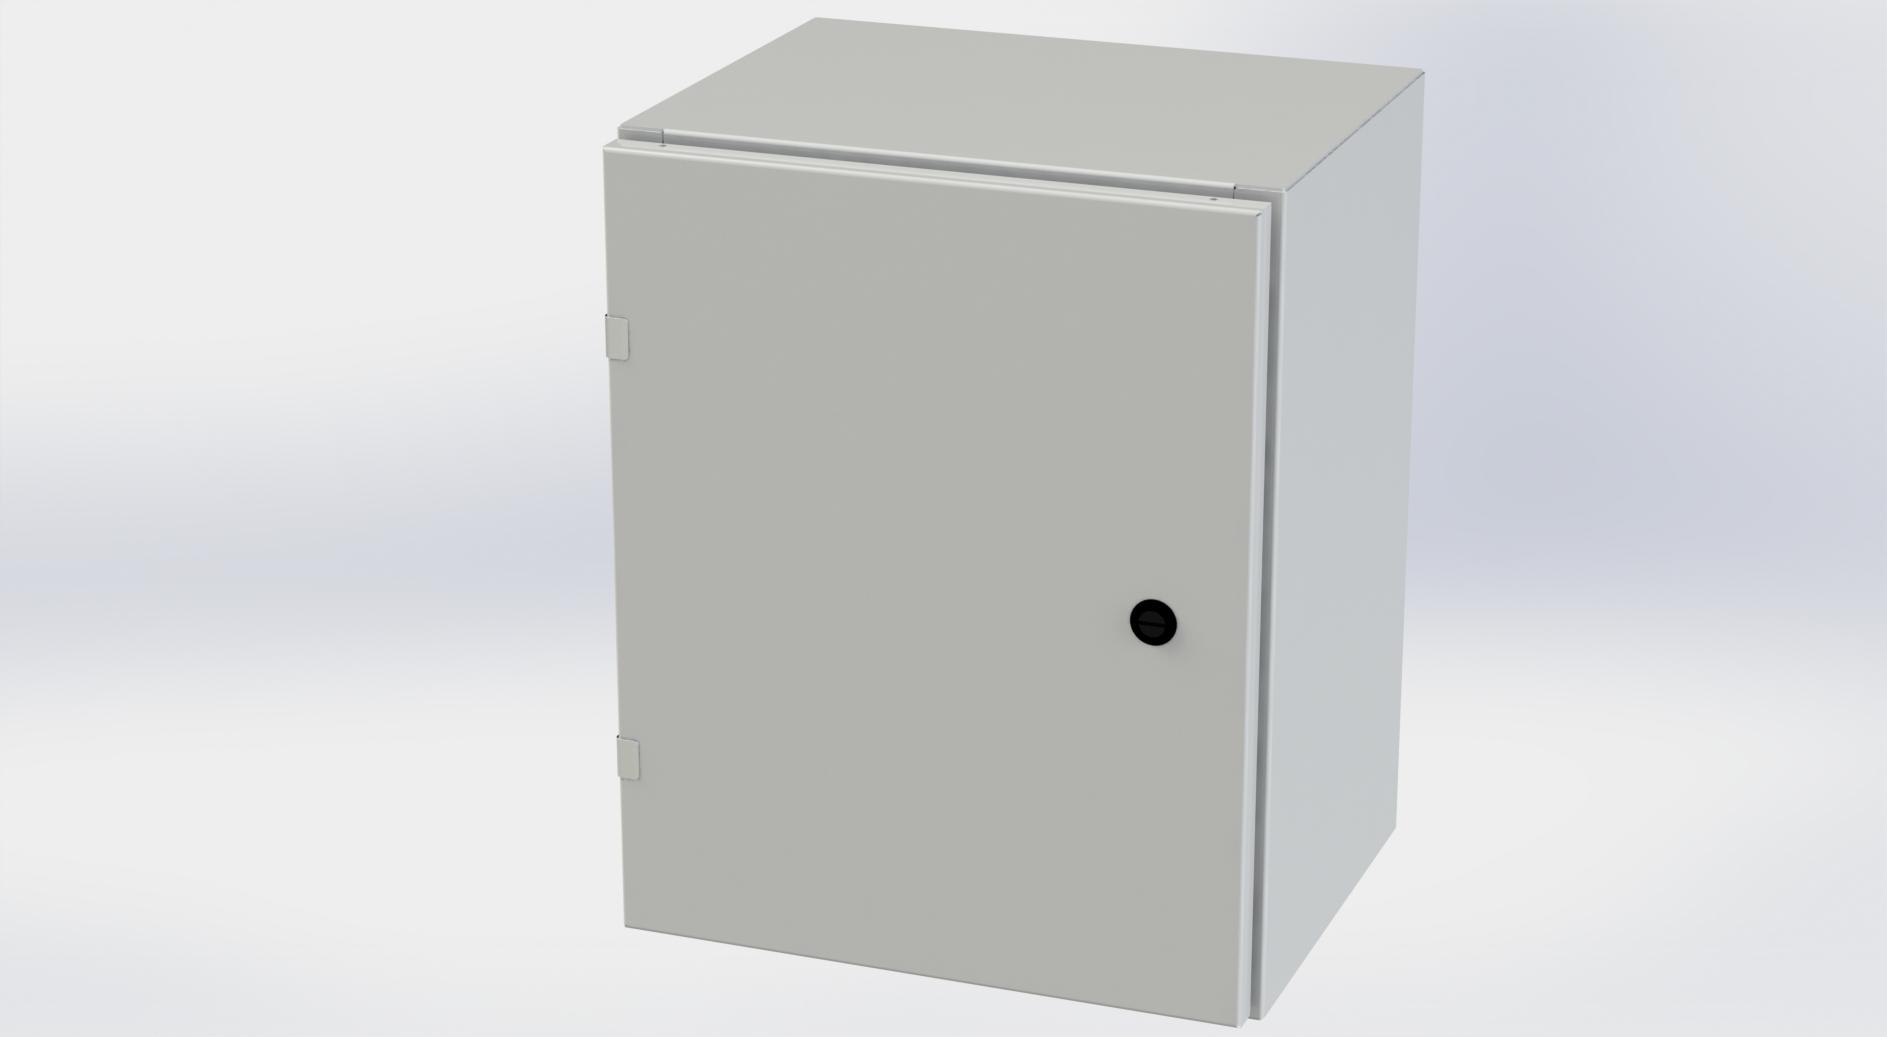 Saginaw Control SCE-20EL1612LPLG EL Enclosure, Height:20.00", Width:16.00", Depth:12.00", RAL 7035 gray powder coating inside and out. Optional sub-panels are powder coated white.